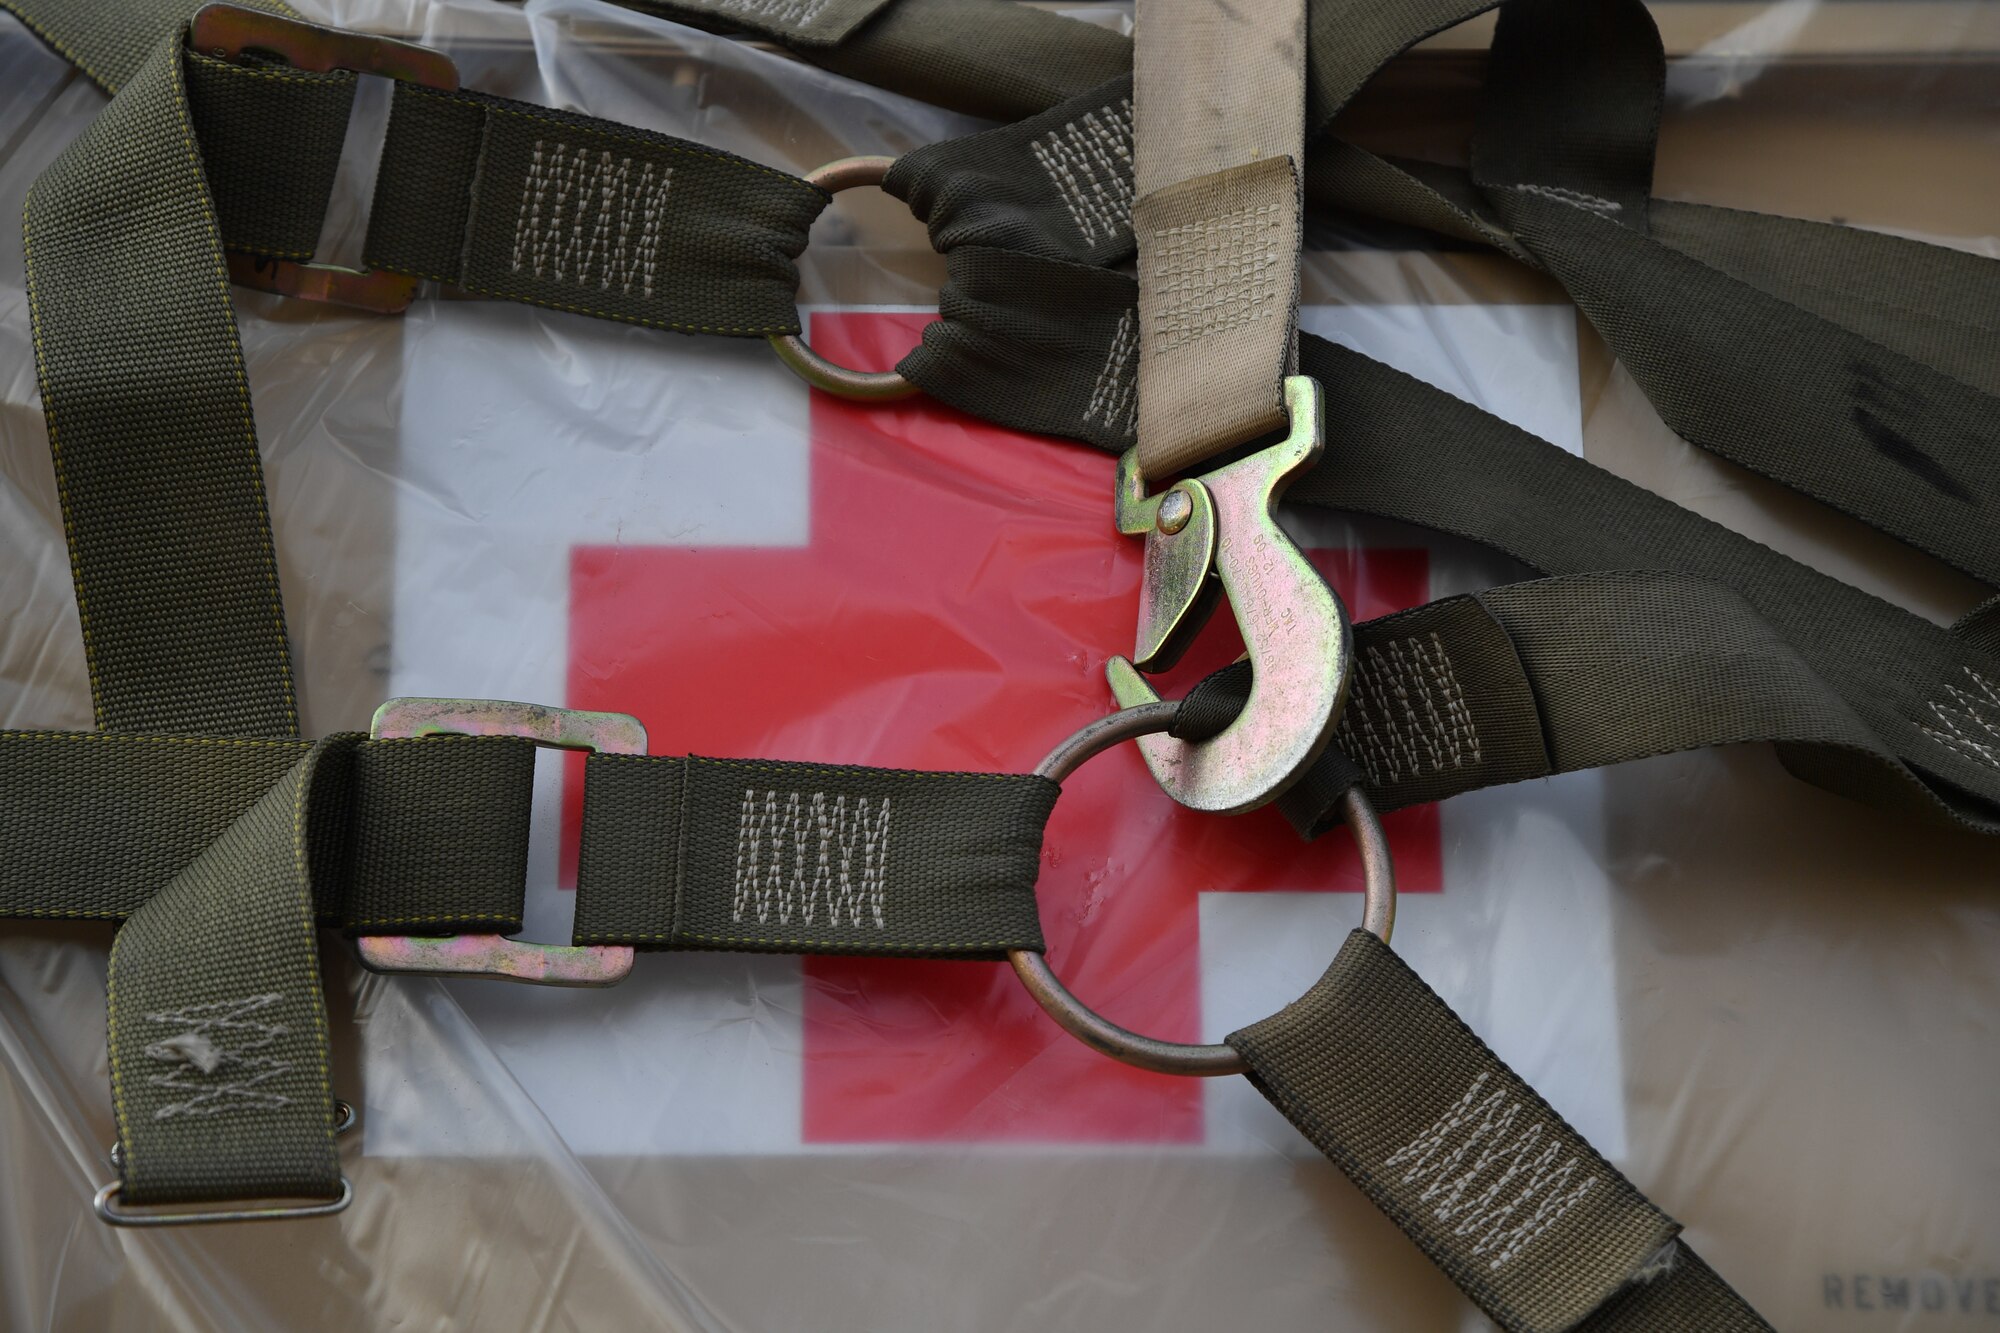 A box marked with a medical cross is wrapped in pallet straps.